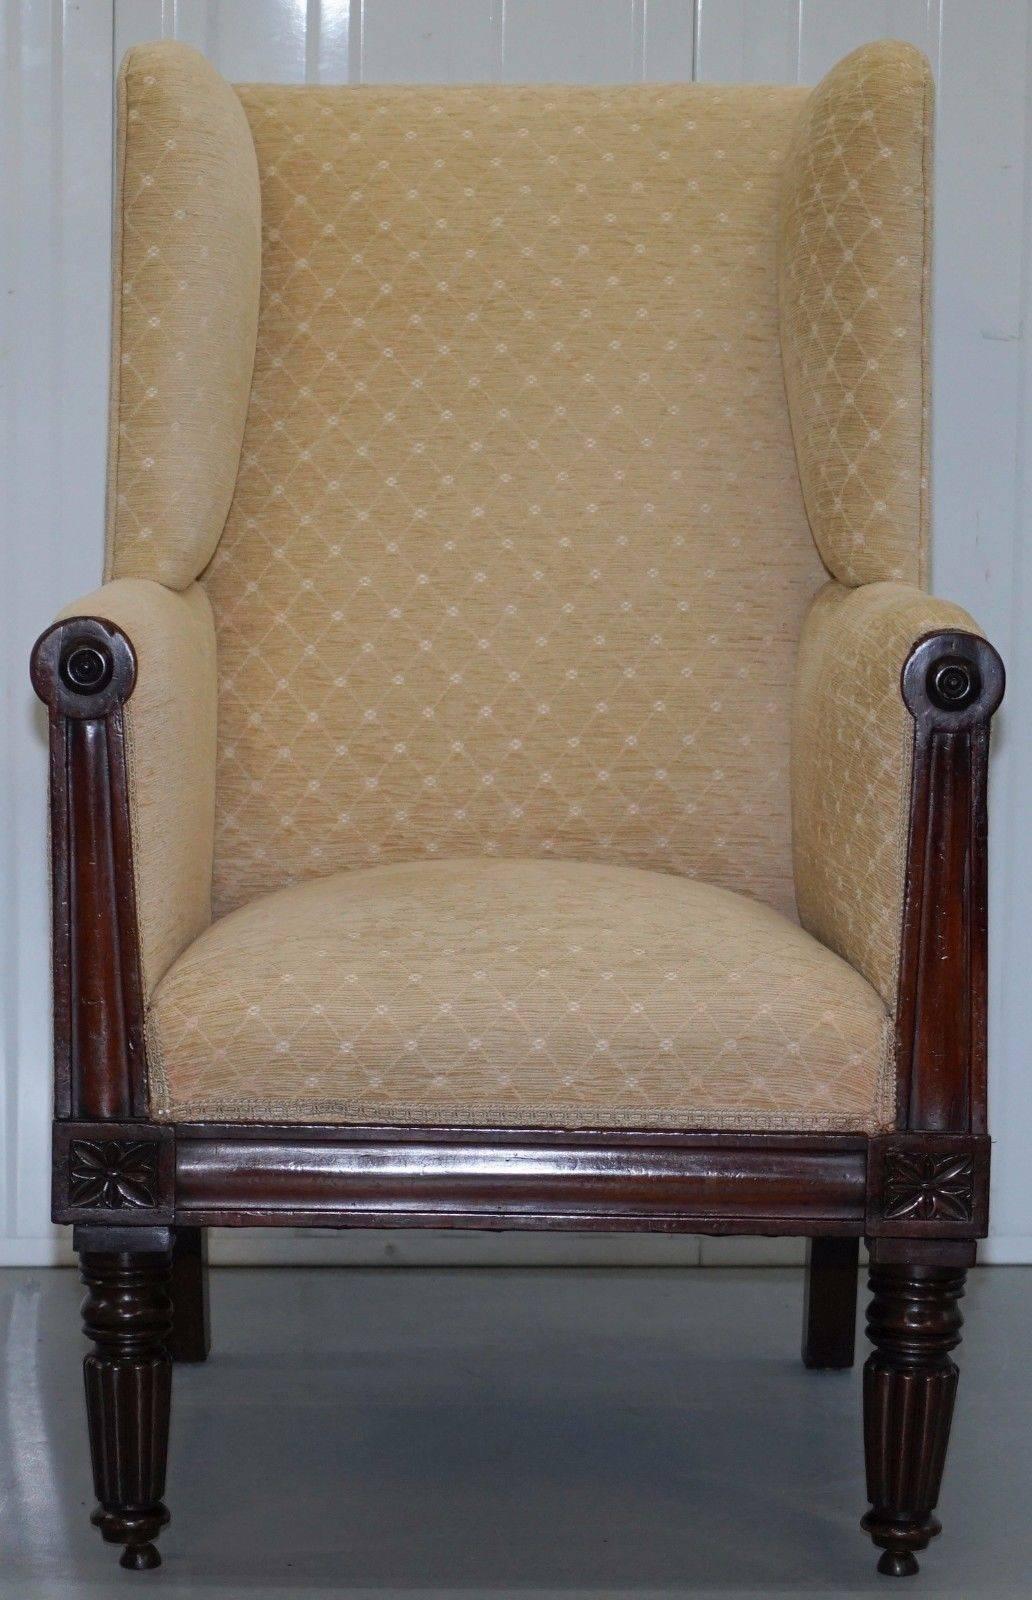 We are delighted to offer for sale this stunning original circa 1790 wingback porters chair with Gillows style legs in solid mahogany

Please scroll all the way to the bottom of the description for multiple supersized pictures
A really rare find